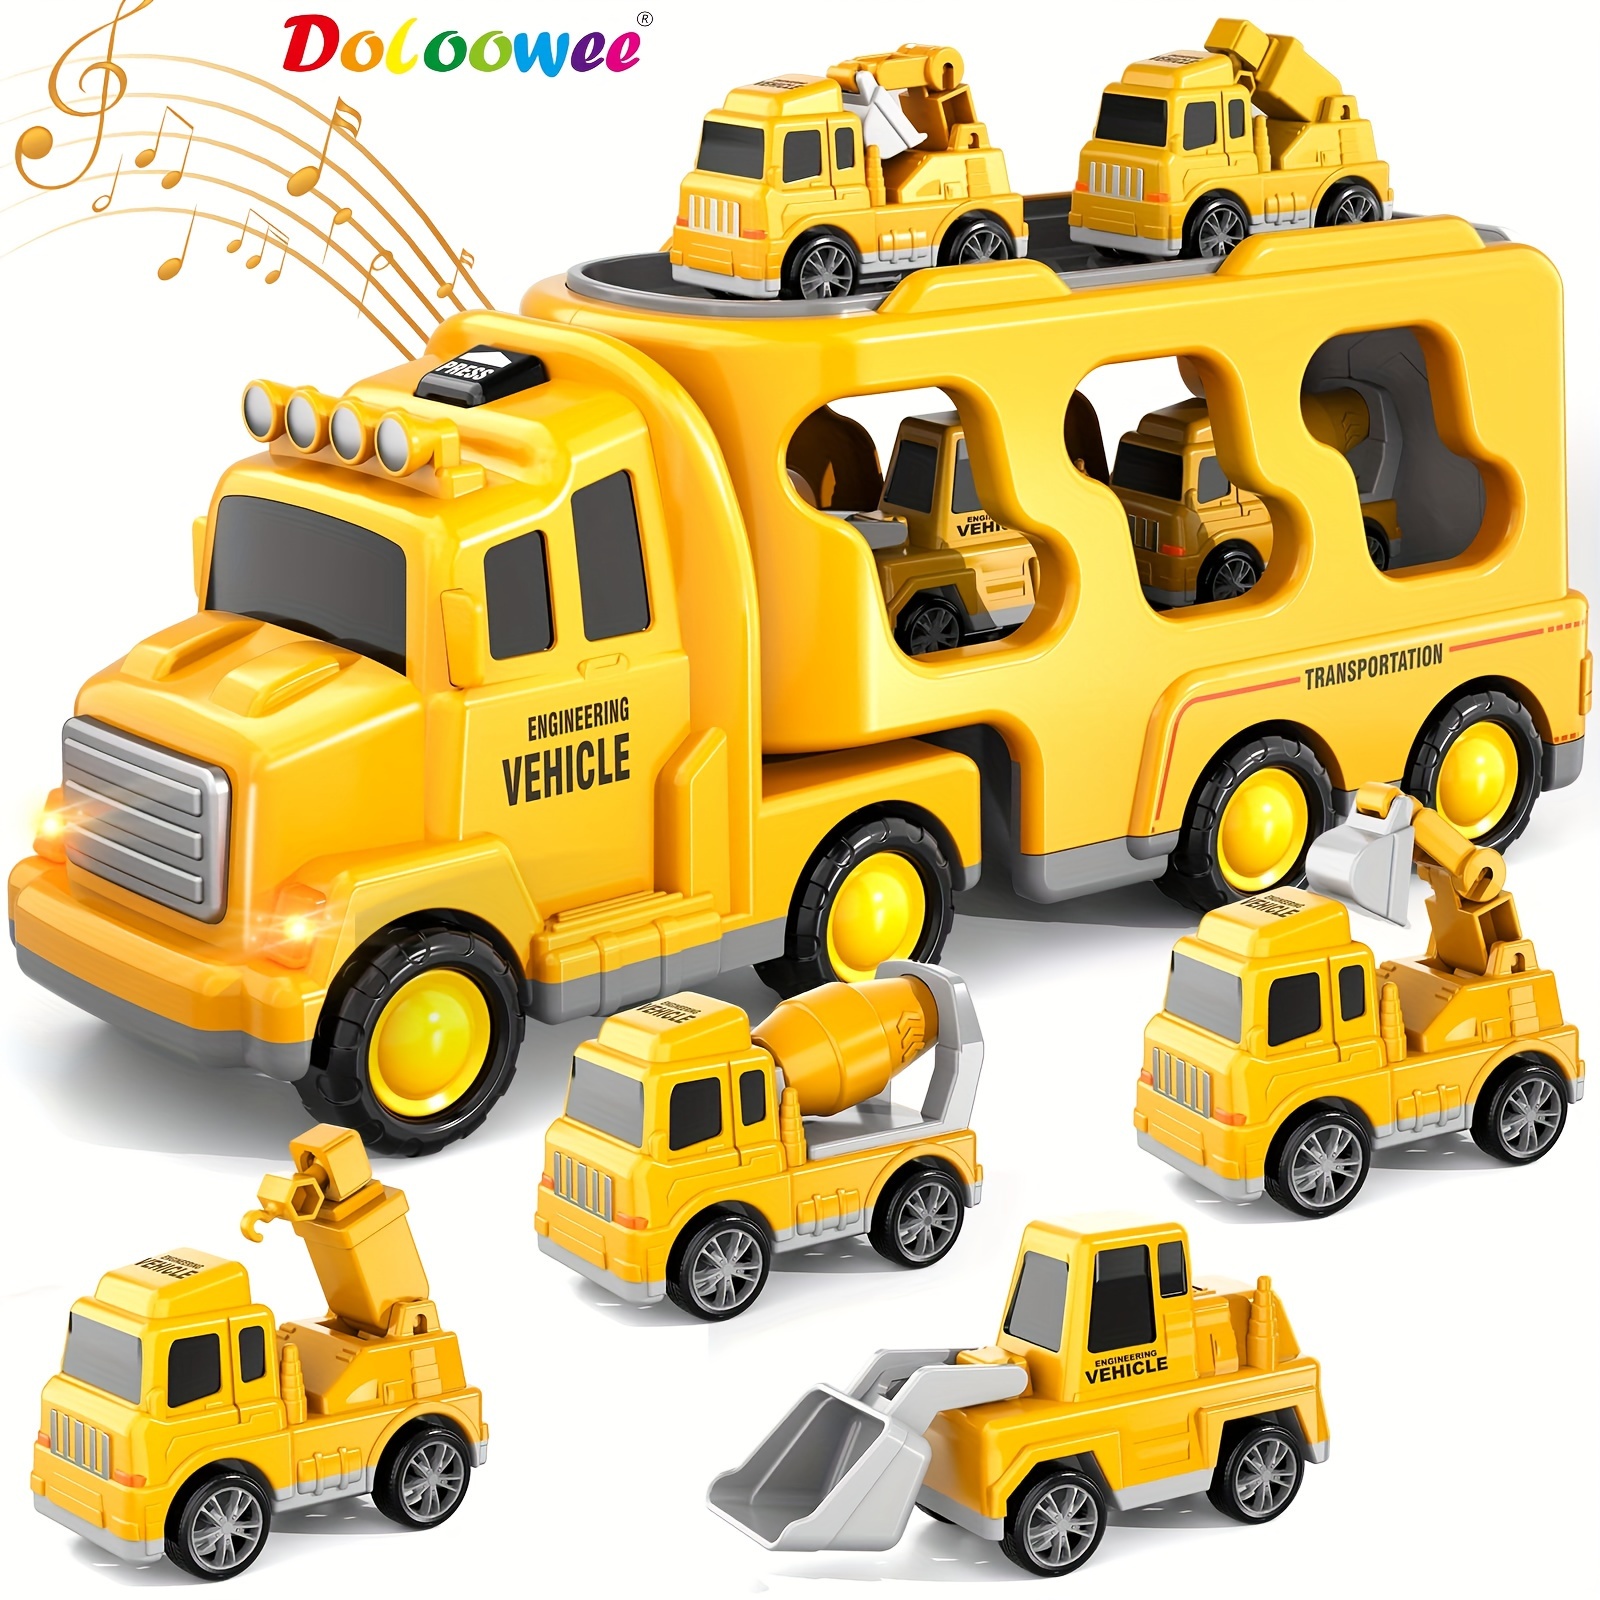 

Doloowee Truck Toys For Toddlers 2 3 4 5 Years Old, 5 In 1 Construction Toy Car With Lights And Sounds, Excavator, Bulldozer, Crane And Mixer, Gift For Boys And Girls 3-5 Years Old